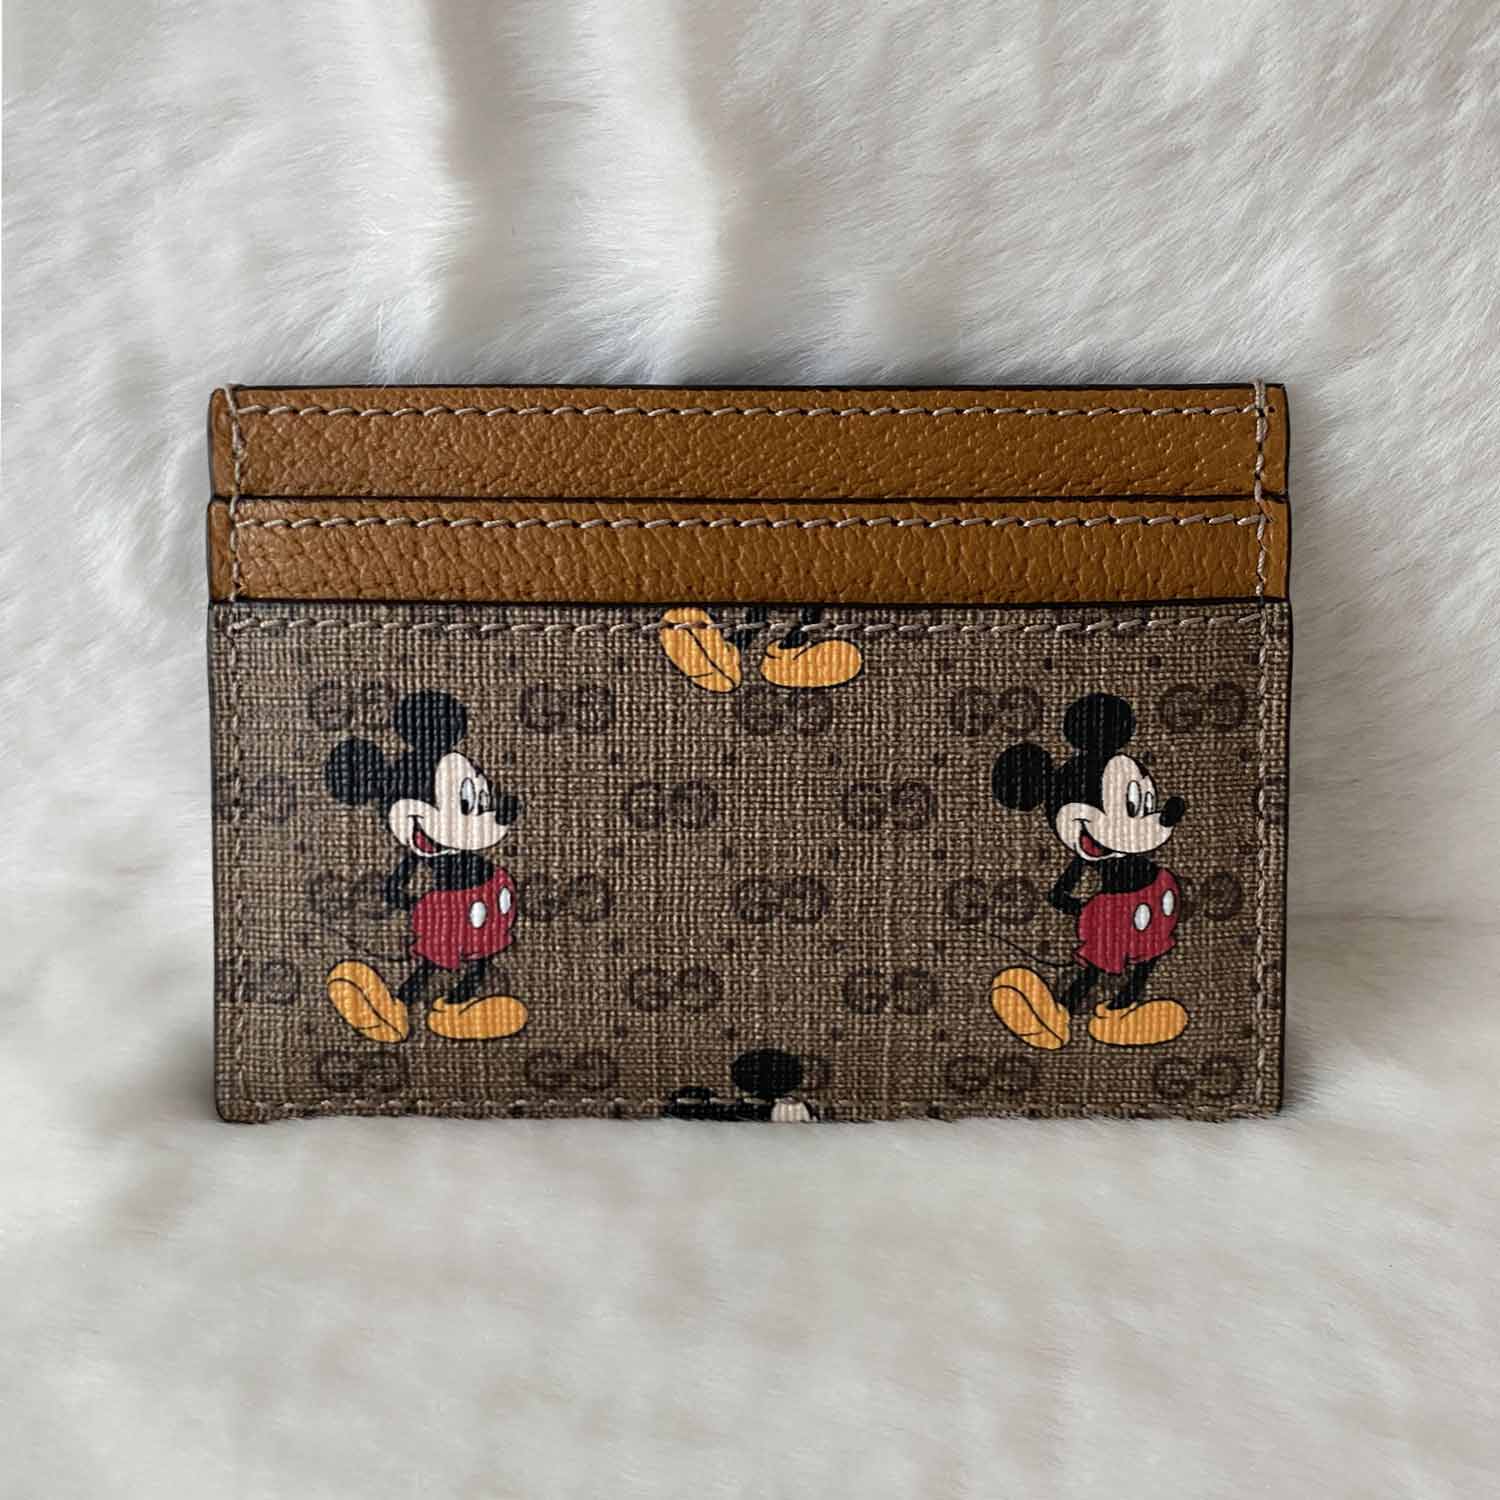 Shop authentic Gucci Limited Edition Gucci x Disney Card Holder at ...